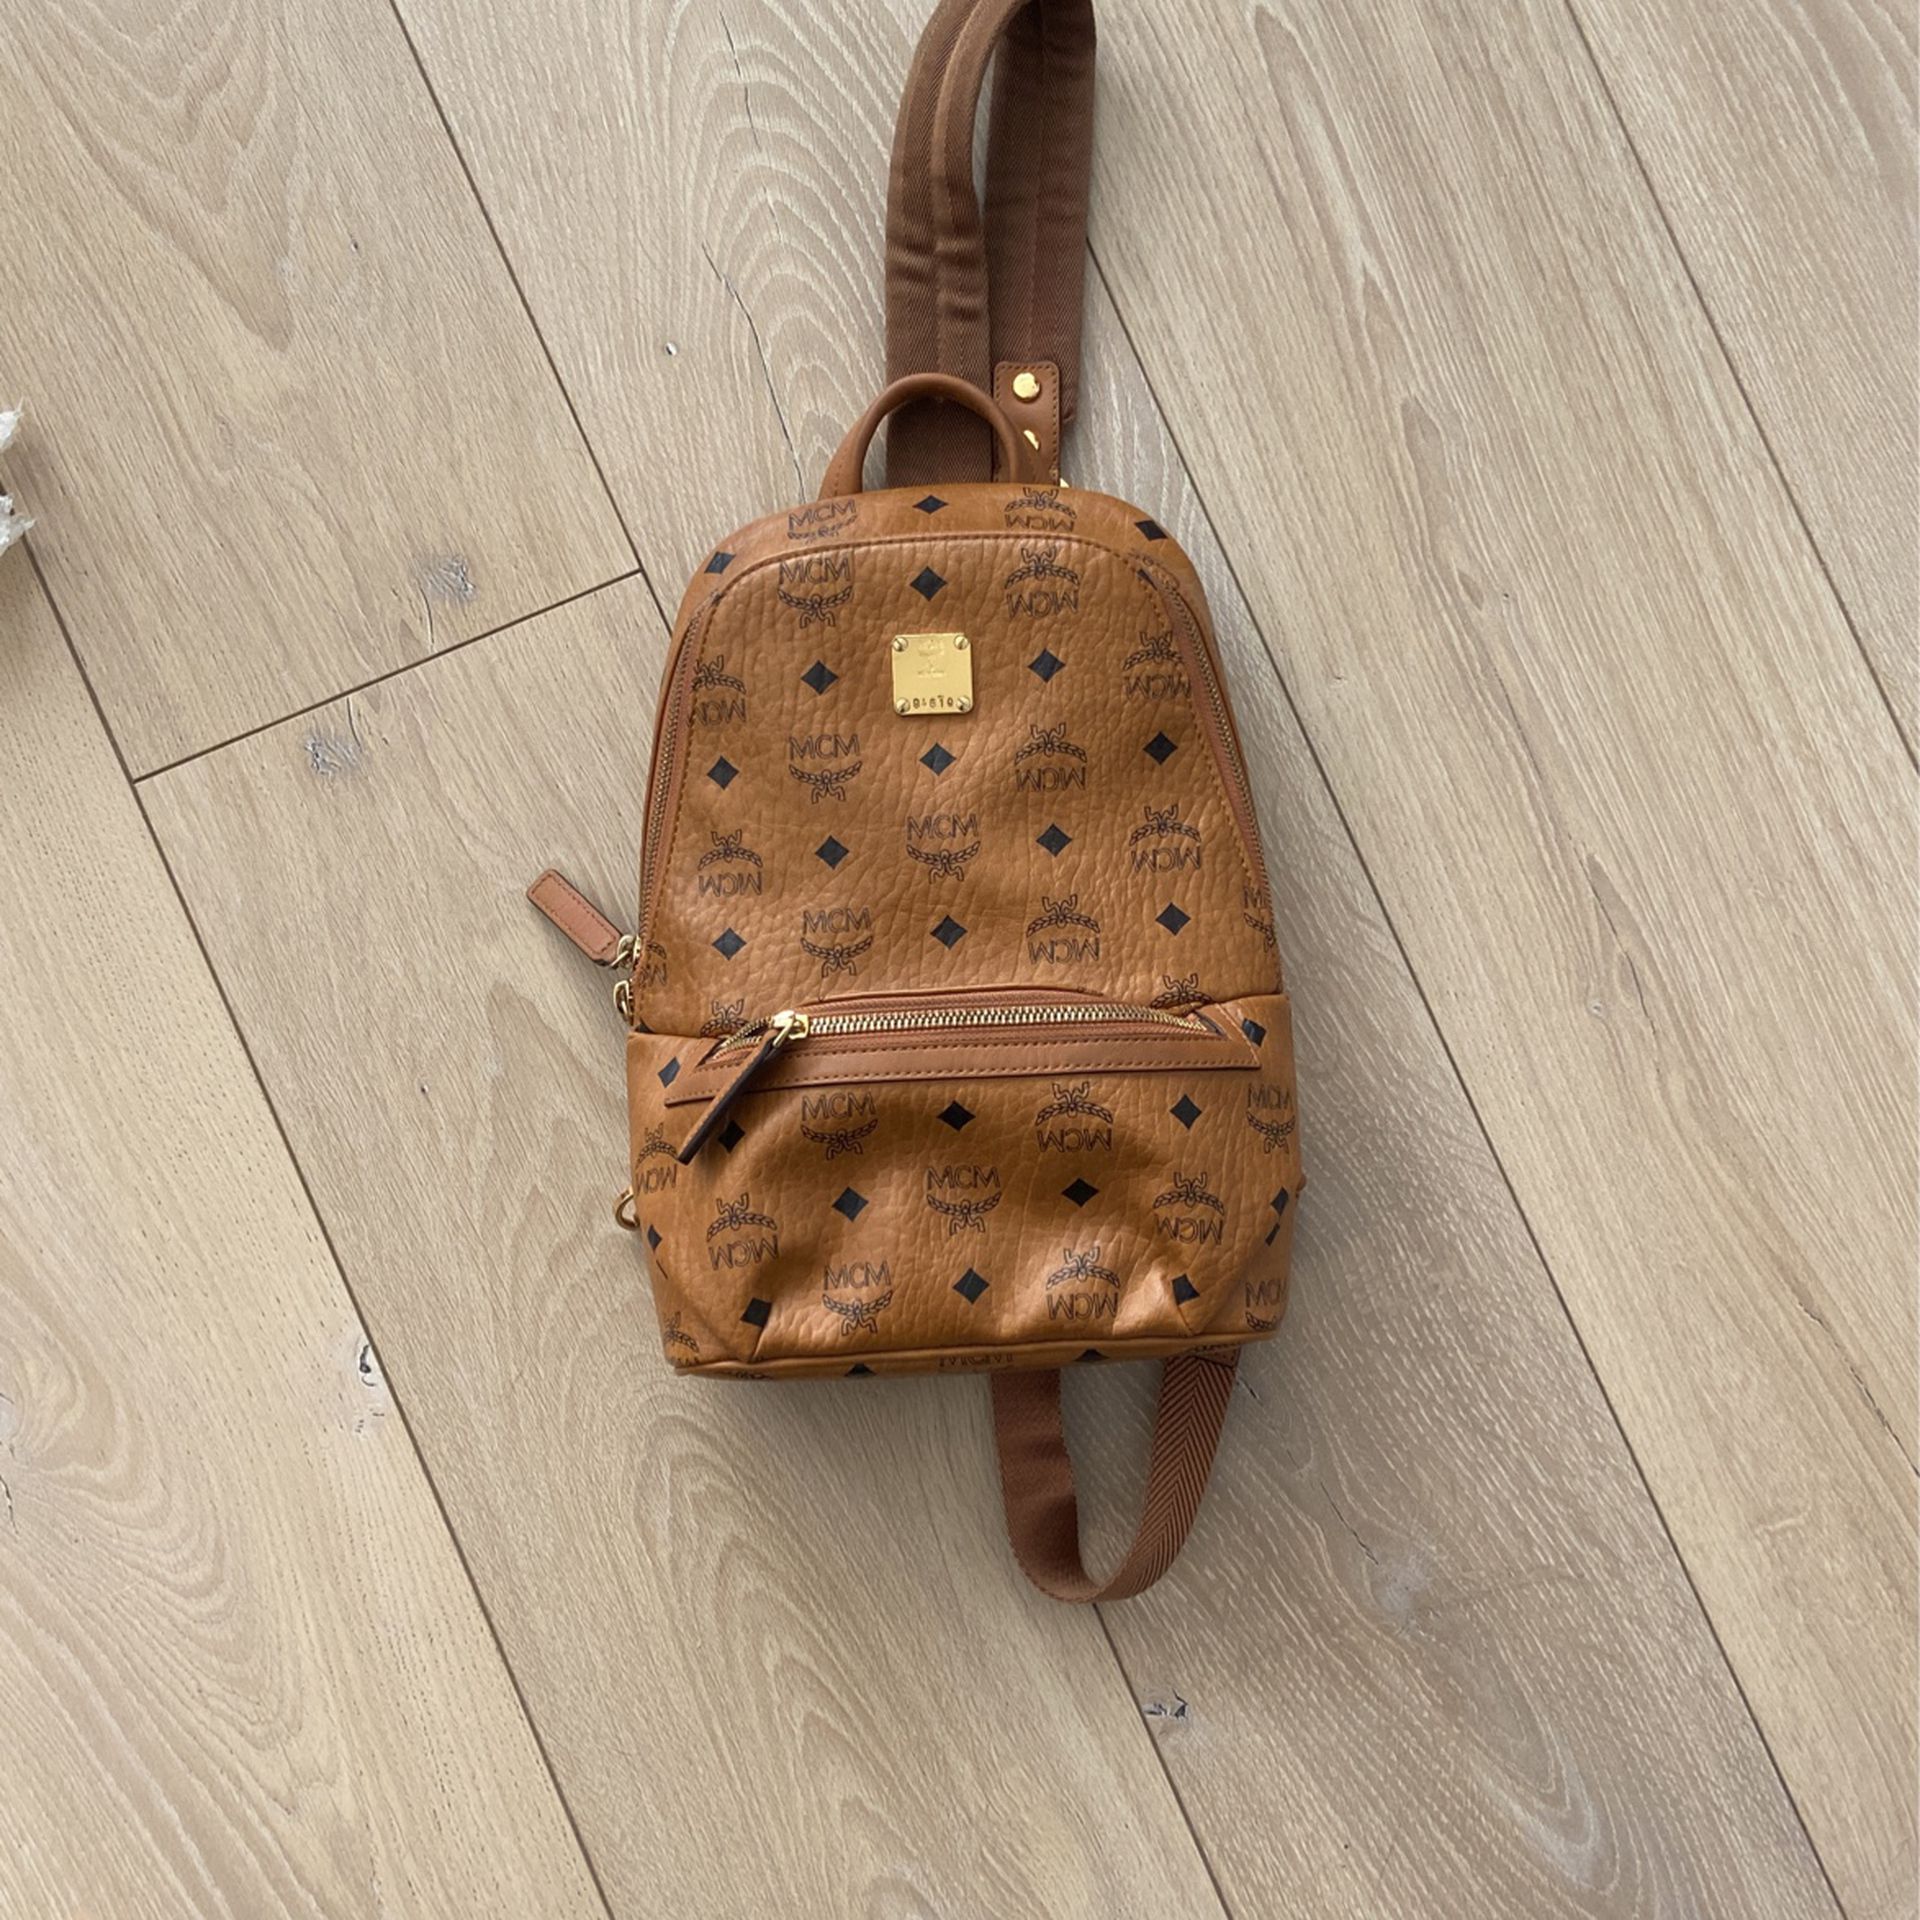 Mcm Original Backpack for Sale in Dallas, TX - OfferUp